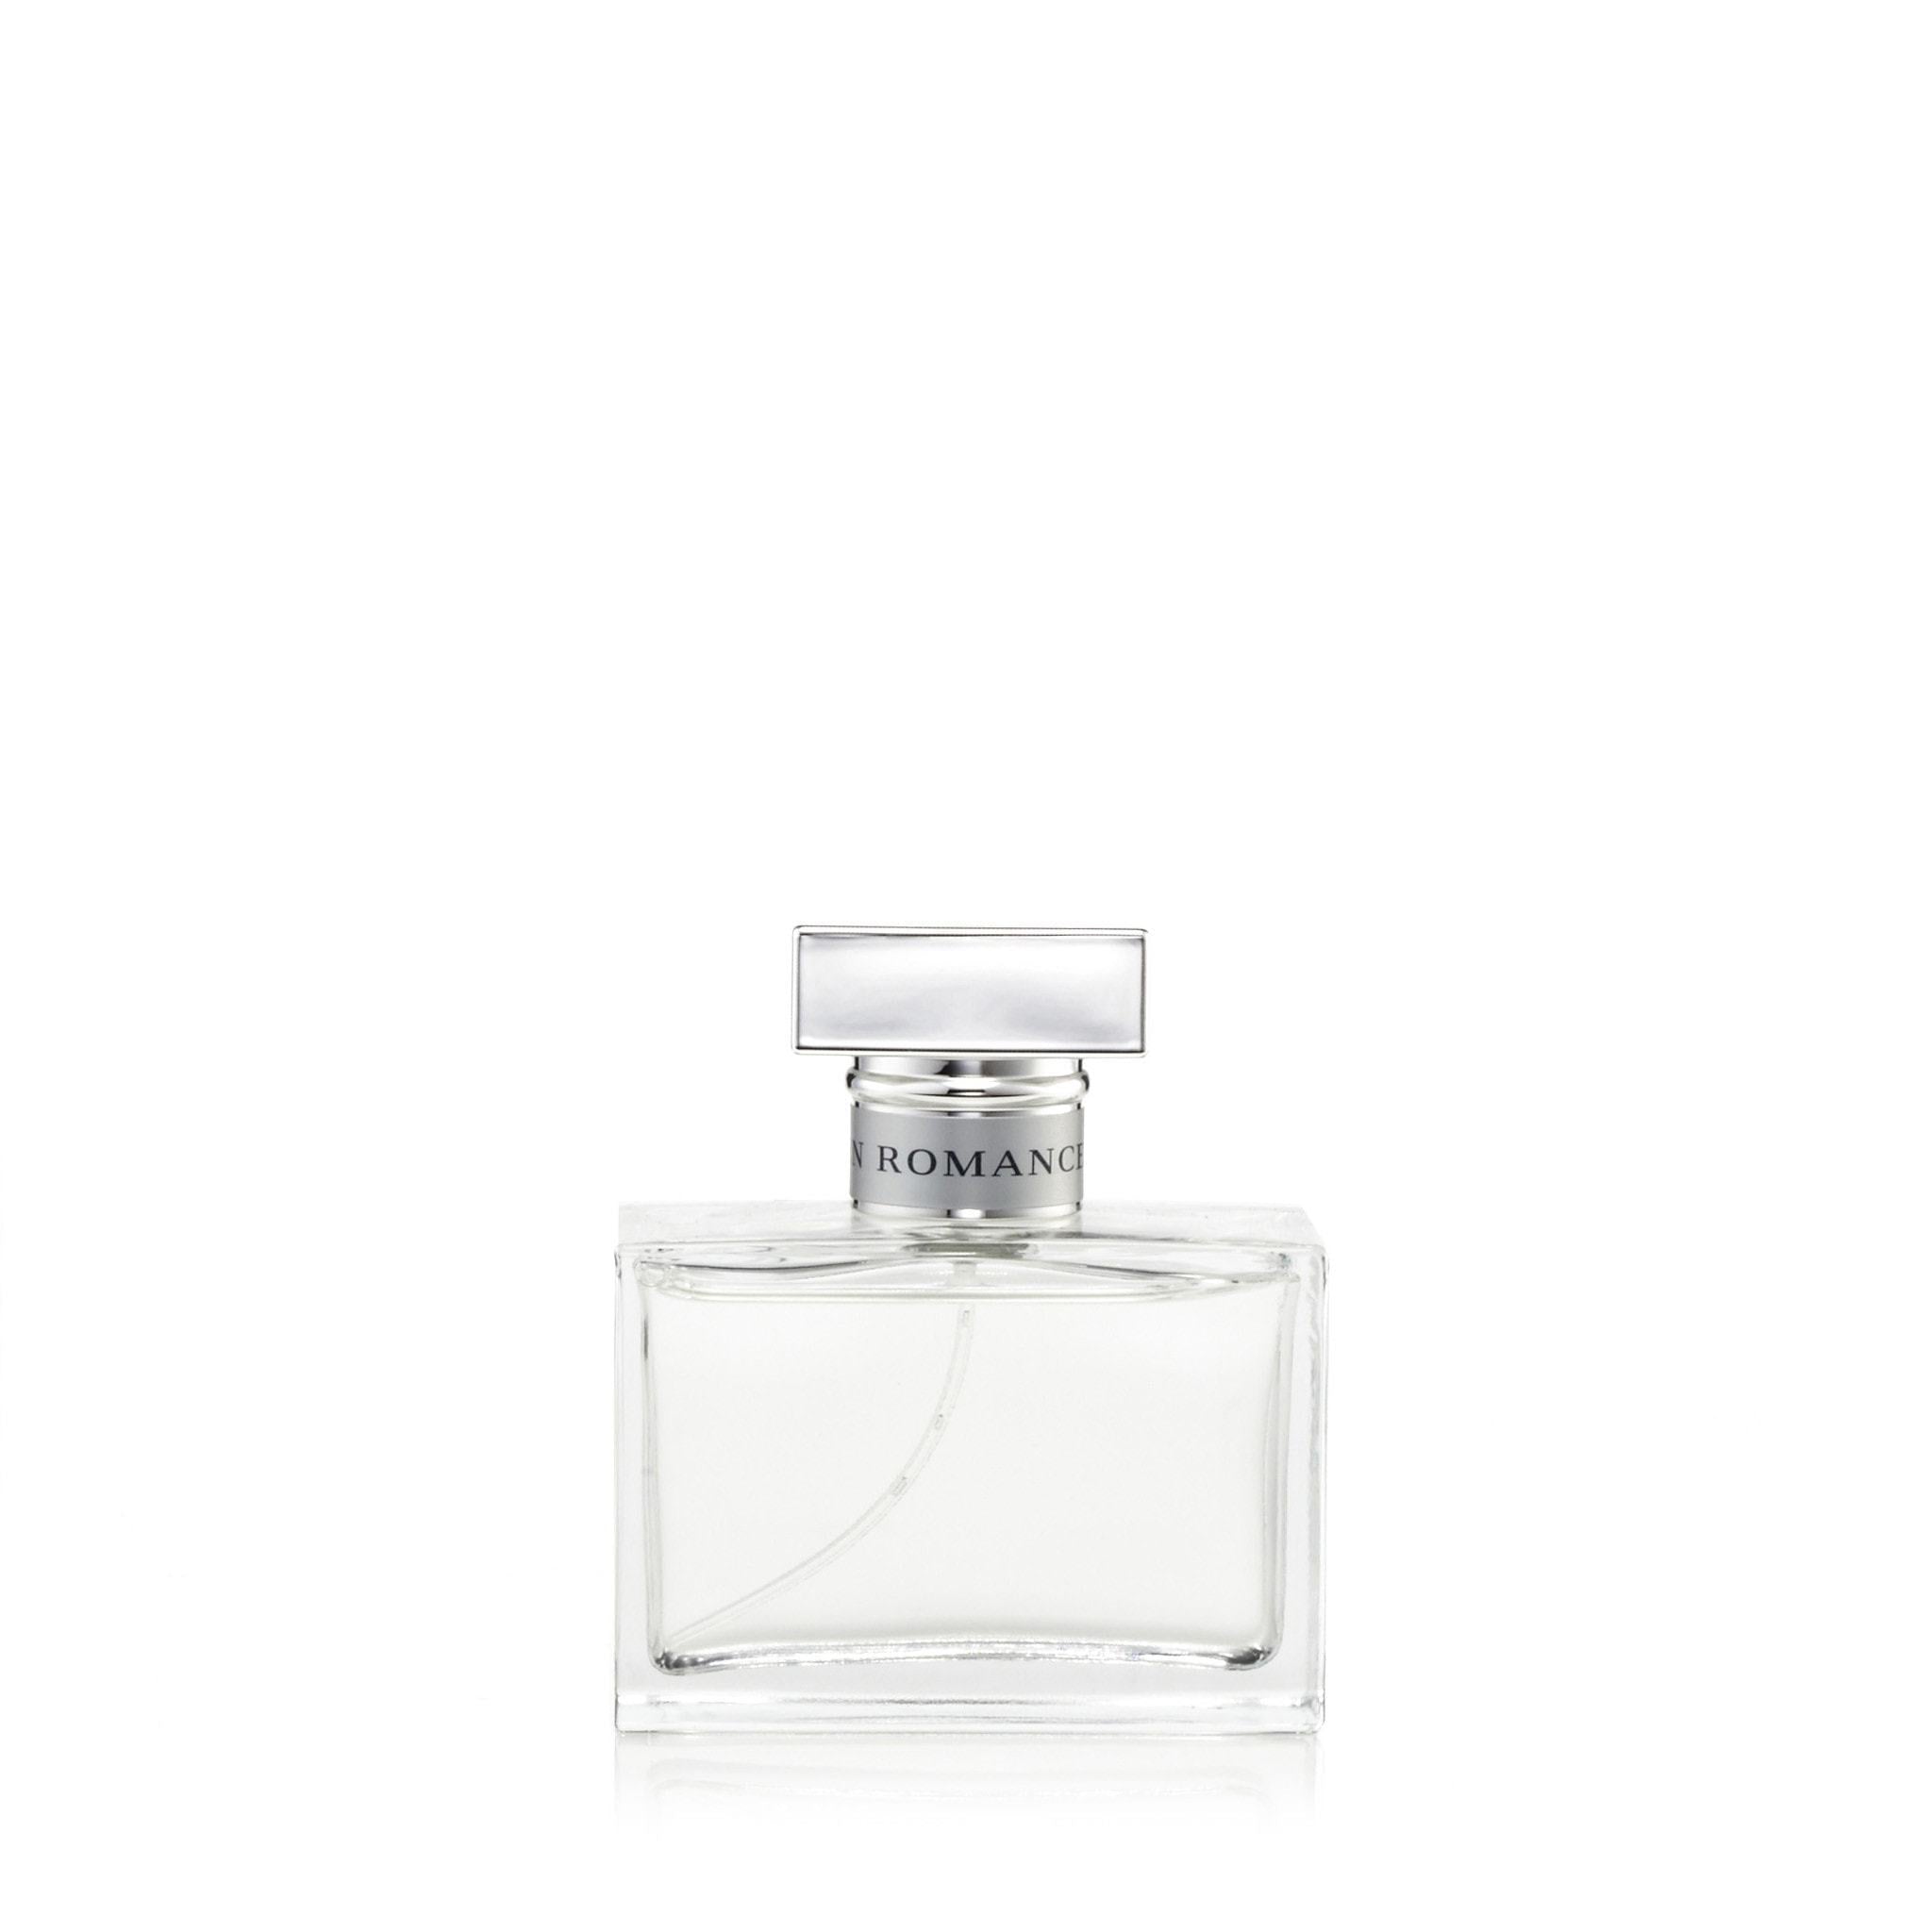 Shop for samples of Romance (Eau de Parfum) by Ralph Lauren for women  rebottled and repacked by